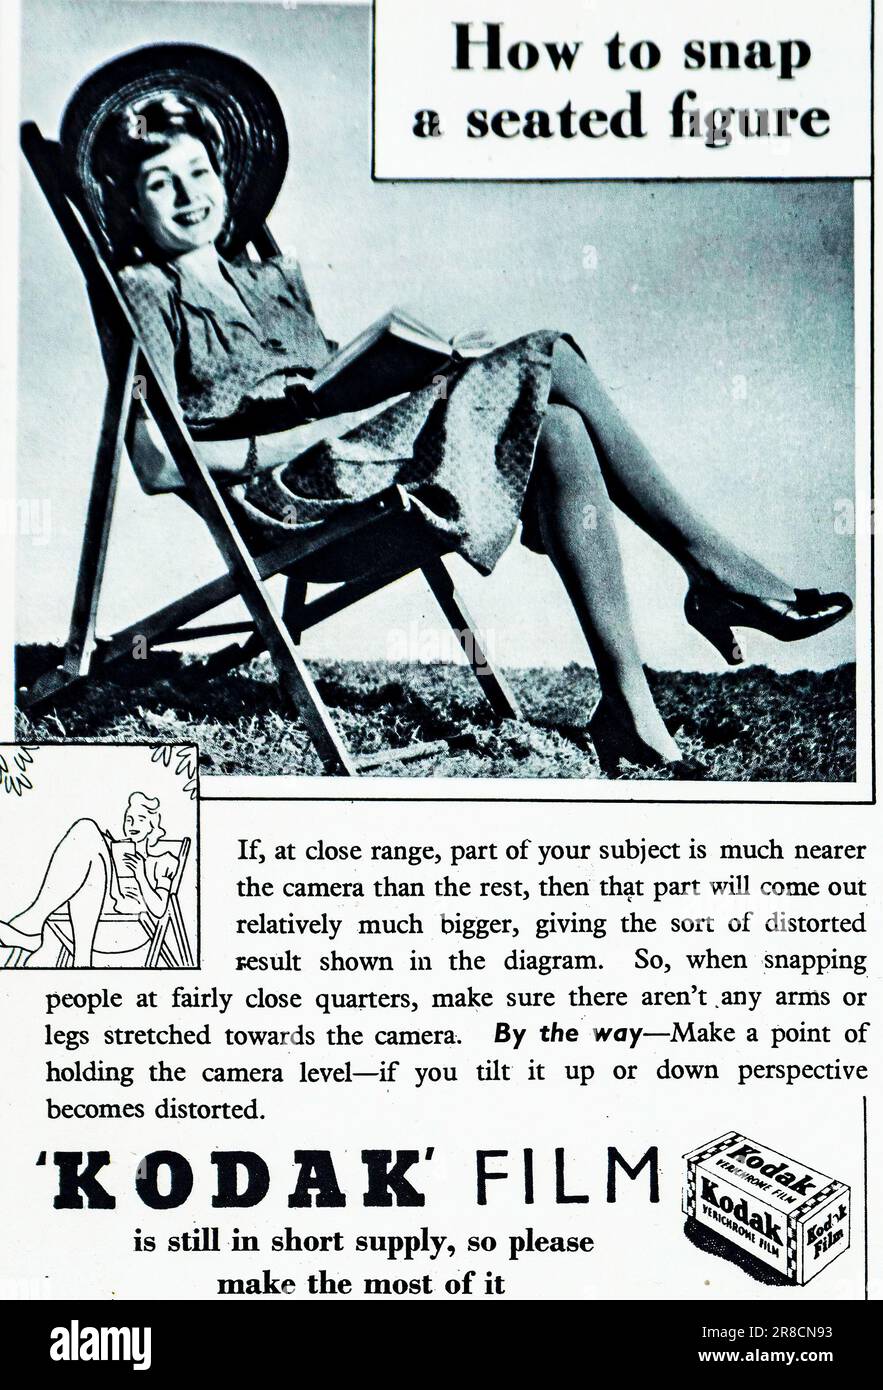 A 1945 advertisement for Kodak Film.Though giving advice about how to position your camera for the best result, the advertisement states that Kodak Film is still in short supply, post war, ‘so please make the most of it’. World War 2 was the most expensive war in history and war ravaged countries were unable to produce sufficient products for their populations, Stock Photo